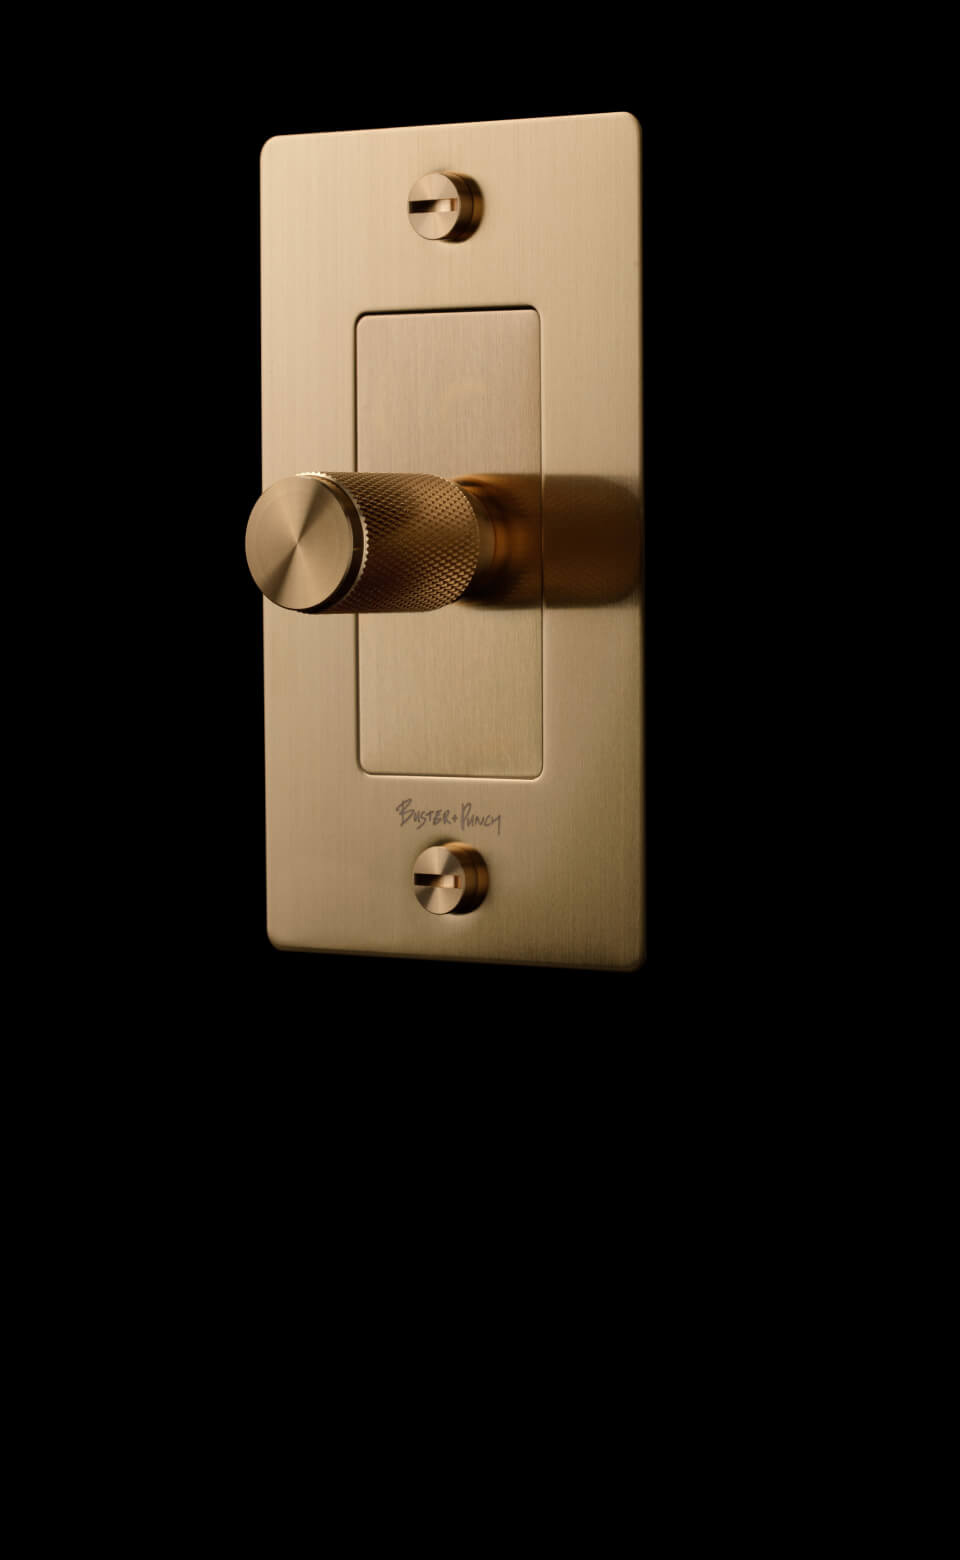 The New Dimmer Switch